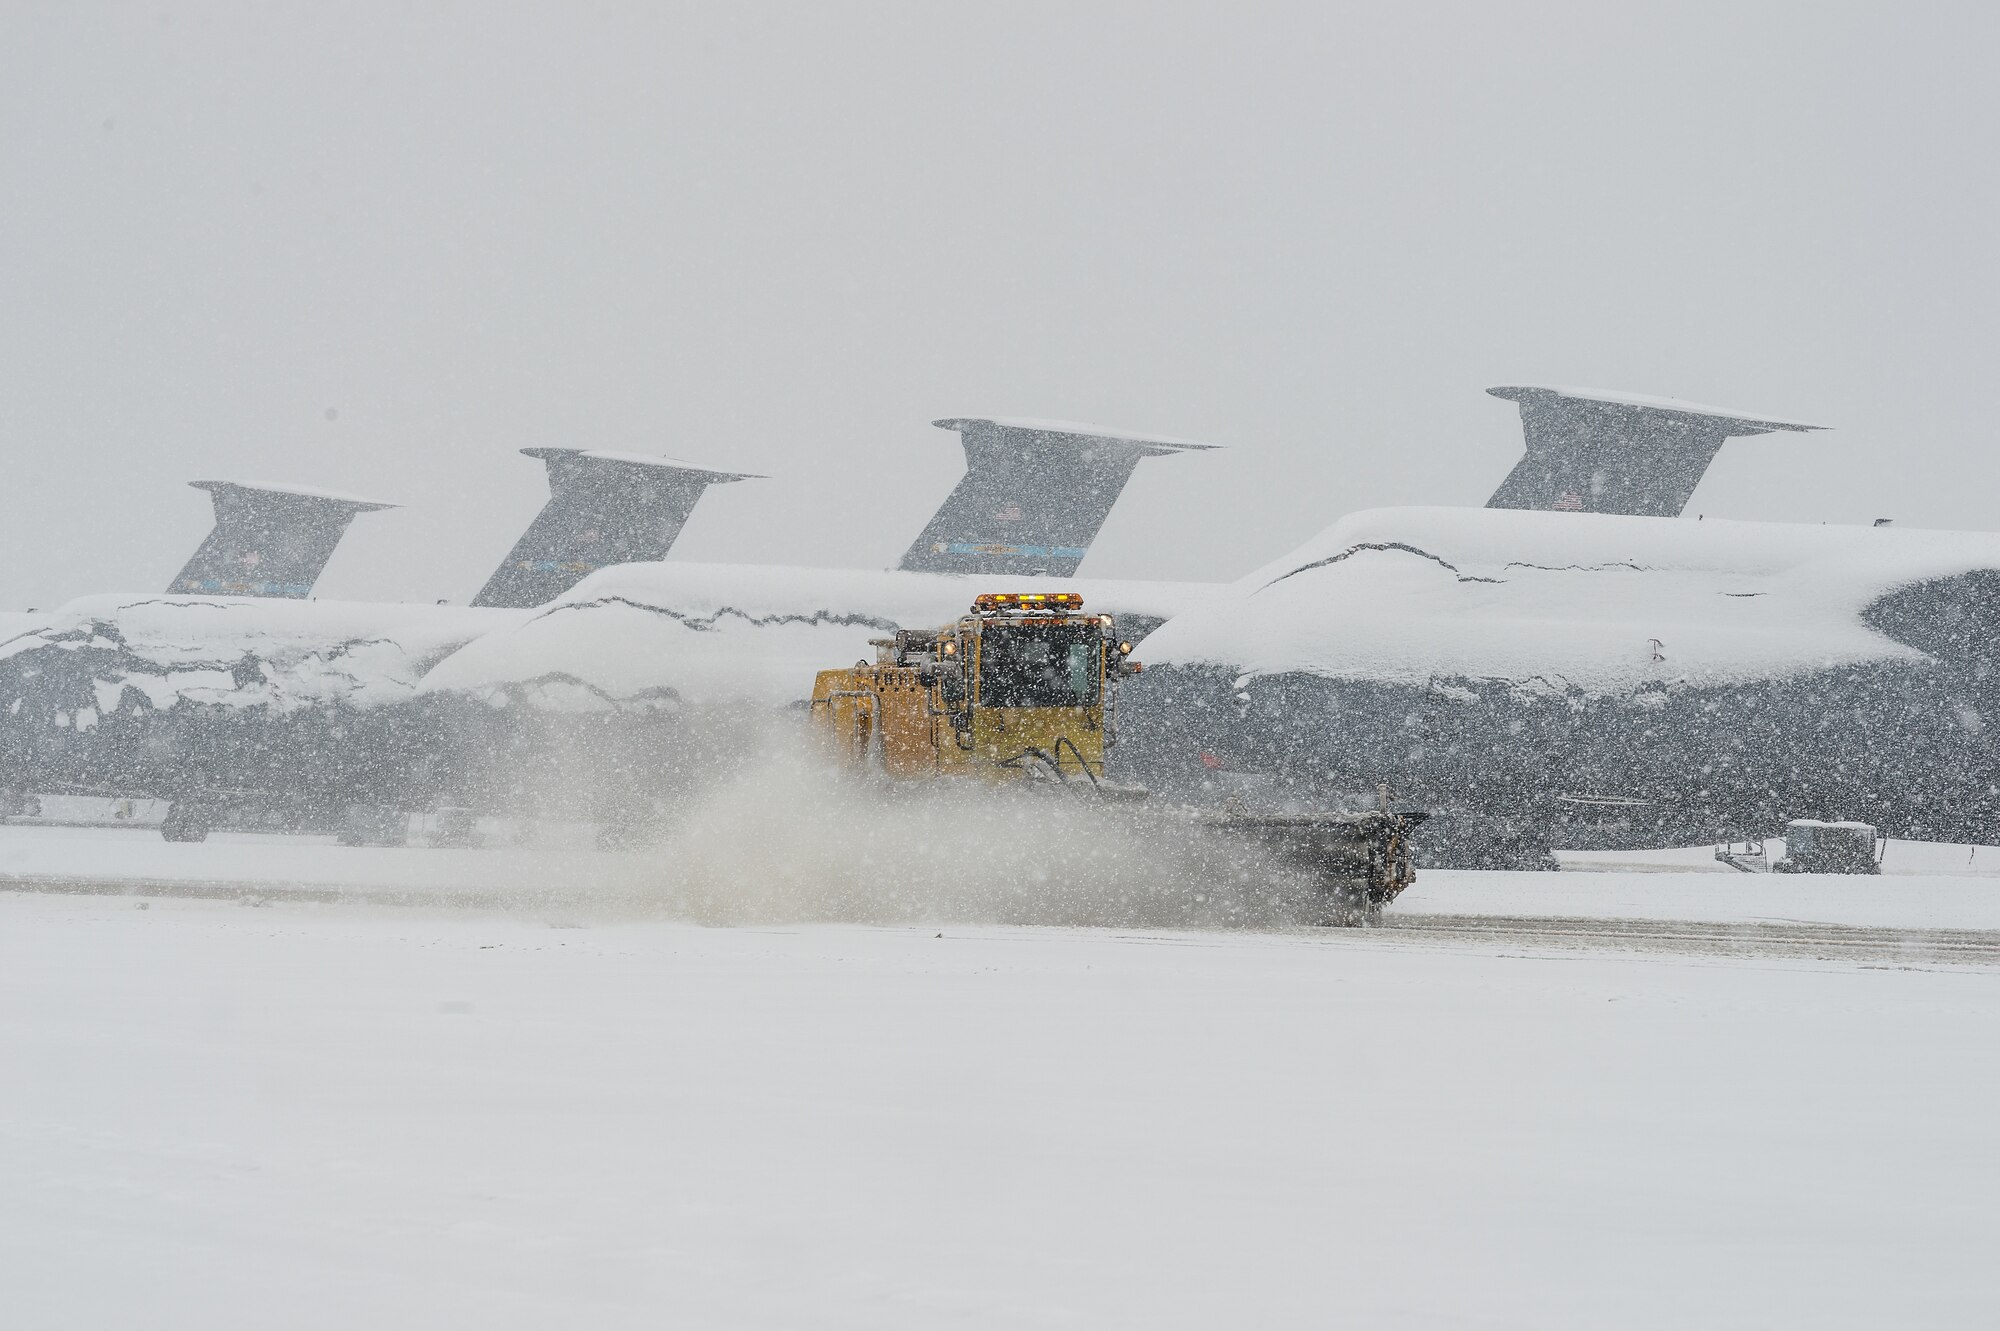 Snow-covered C-5M Super Galaxy aircraft sit on the flight line as a snowplow from the 436th Civil Engineer Squadron clears snow at Dover Air Force Base, Delaware, Feb. 11, 2021. As Winter Storm Roland produced a wintry mix of precipitation, the base continued normal operations and prepared for additional forecast snowfall. (U.S. Air Force photo by Roland Balik)